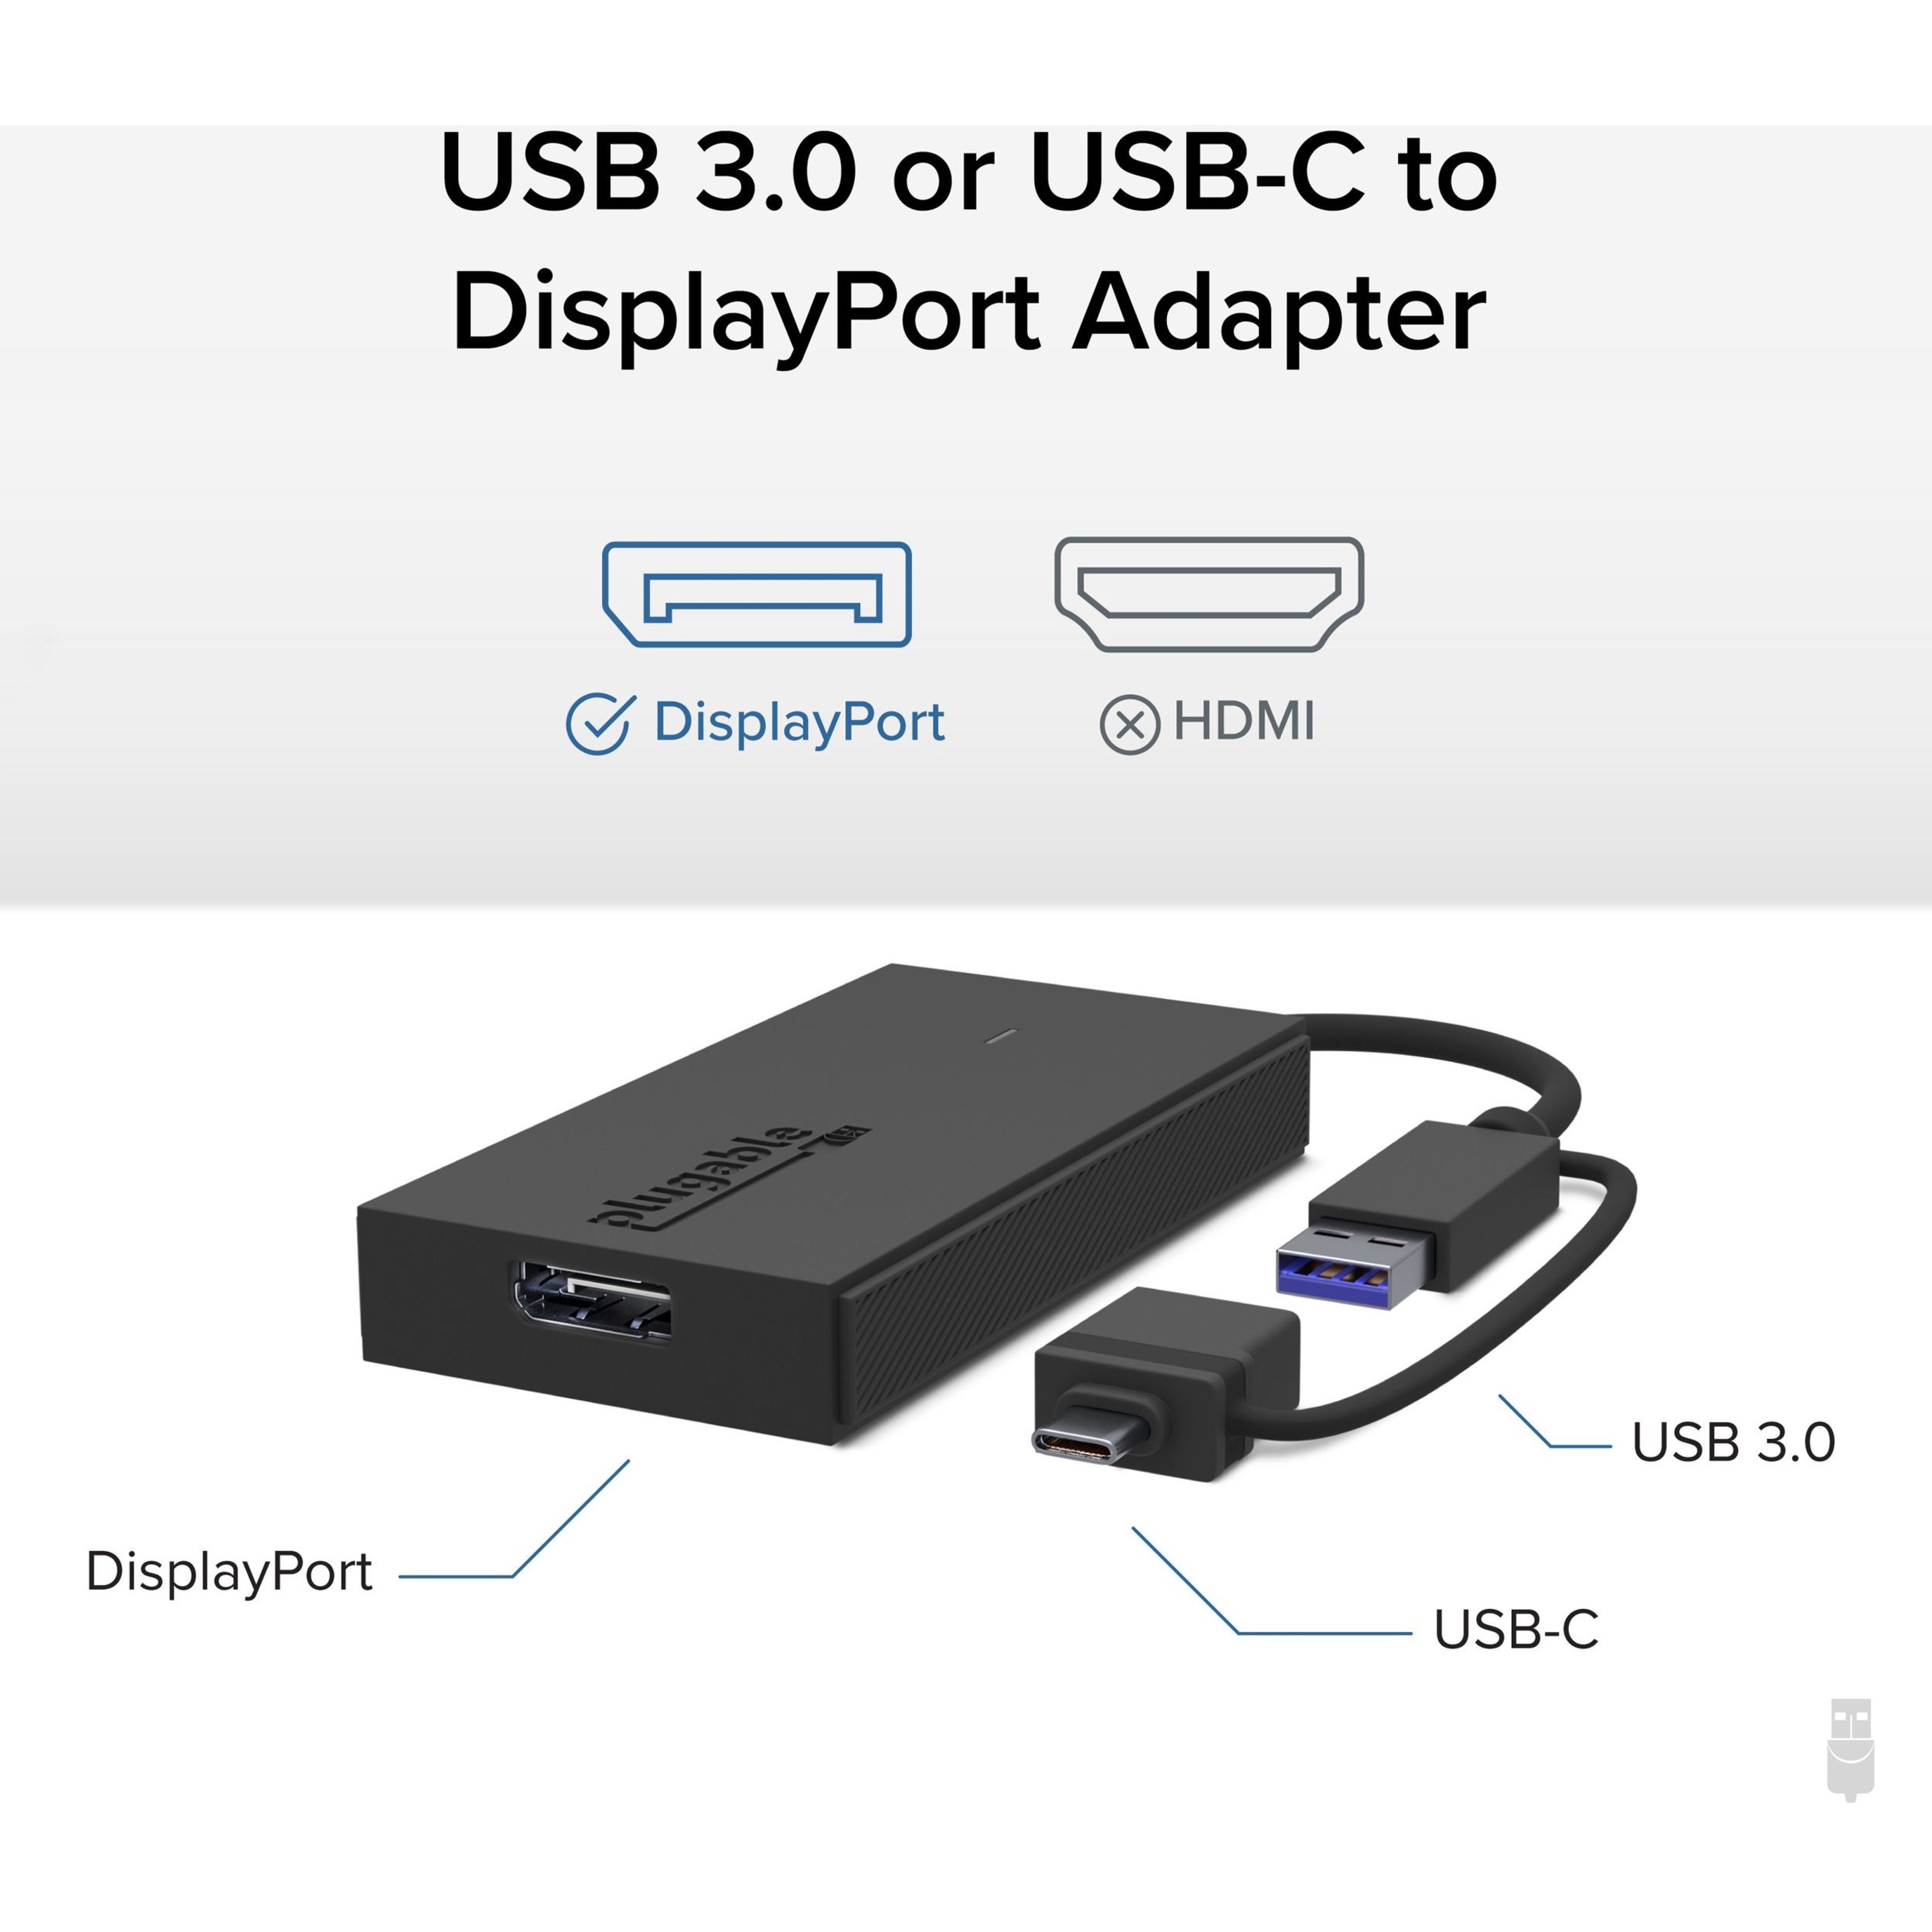 Plugable USB C to DisplayPort Adapter, Universal Video Graphics Adapter for USB 3.0 and USB-C Macs and Windows, Extend a DisplayPort Monitor up to 1080p@60Hz - image 2 of 7